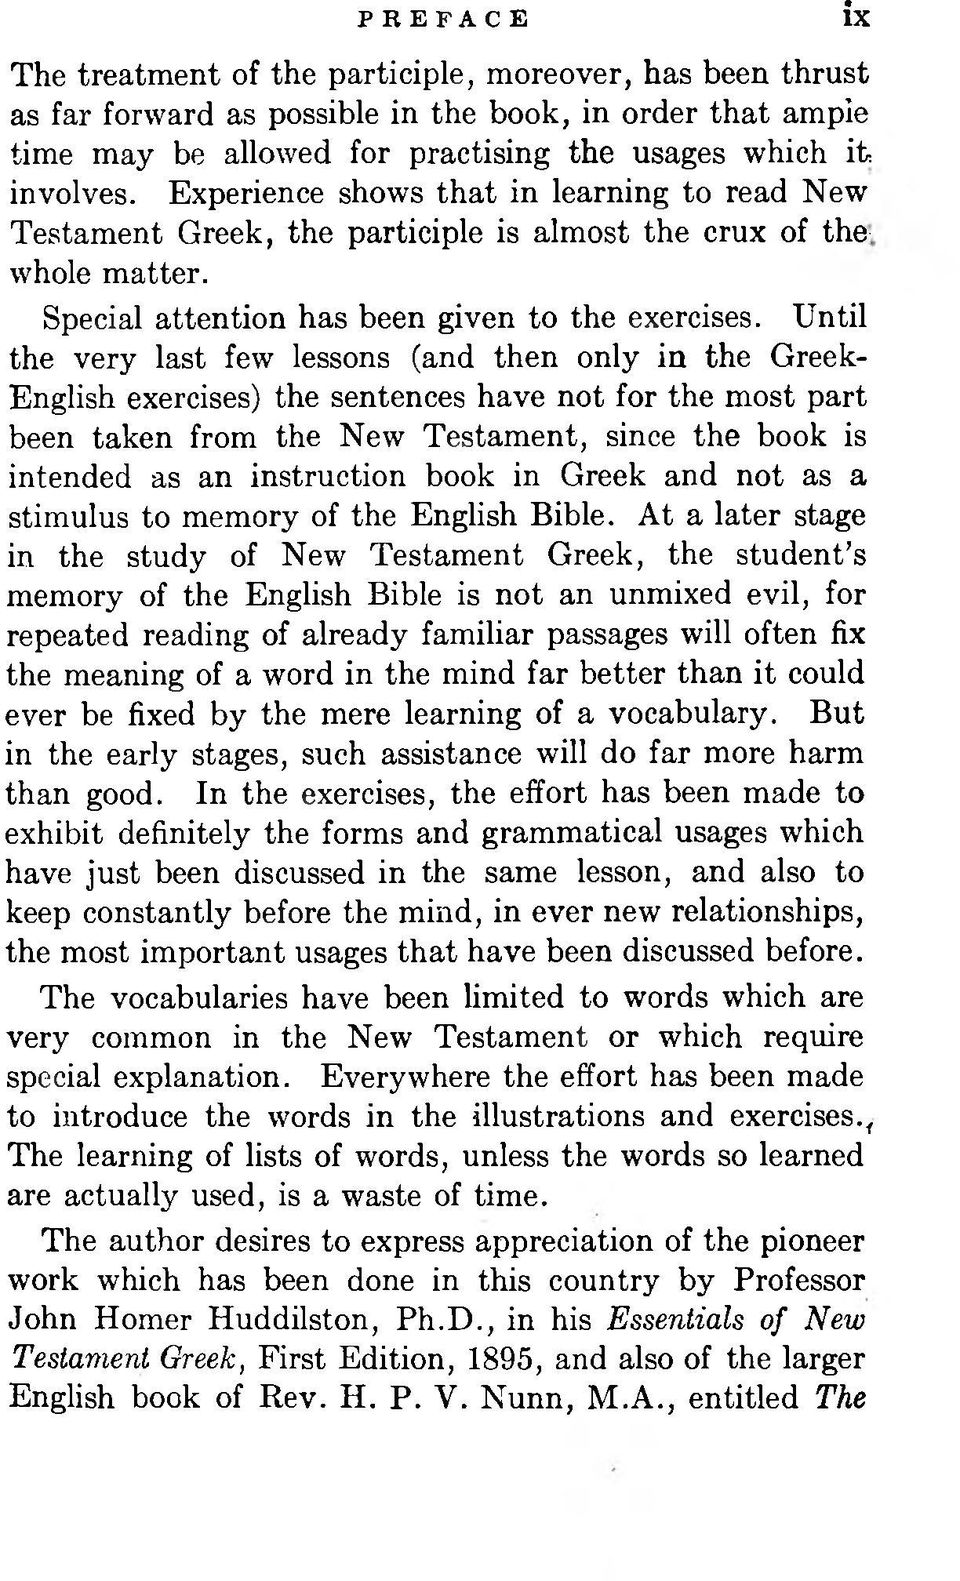 Until the very last few lessons (and then only in the Greek- English exercises) the sentences have not for the most part been taken from the New Testament, since the book is intended as an